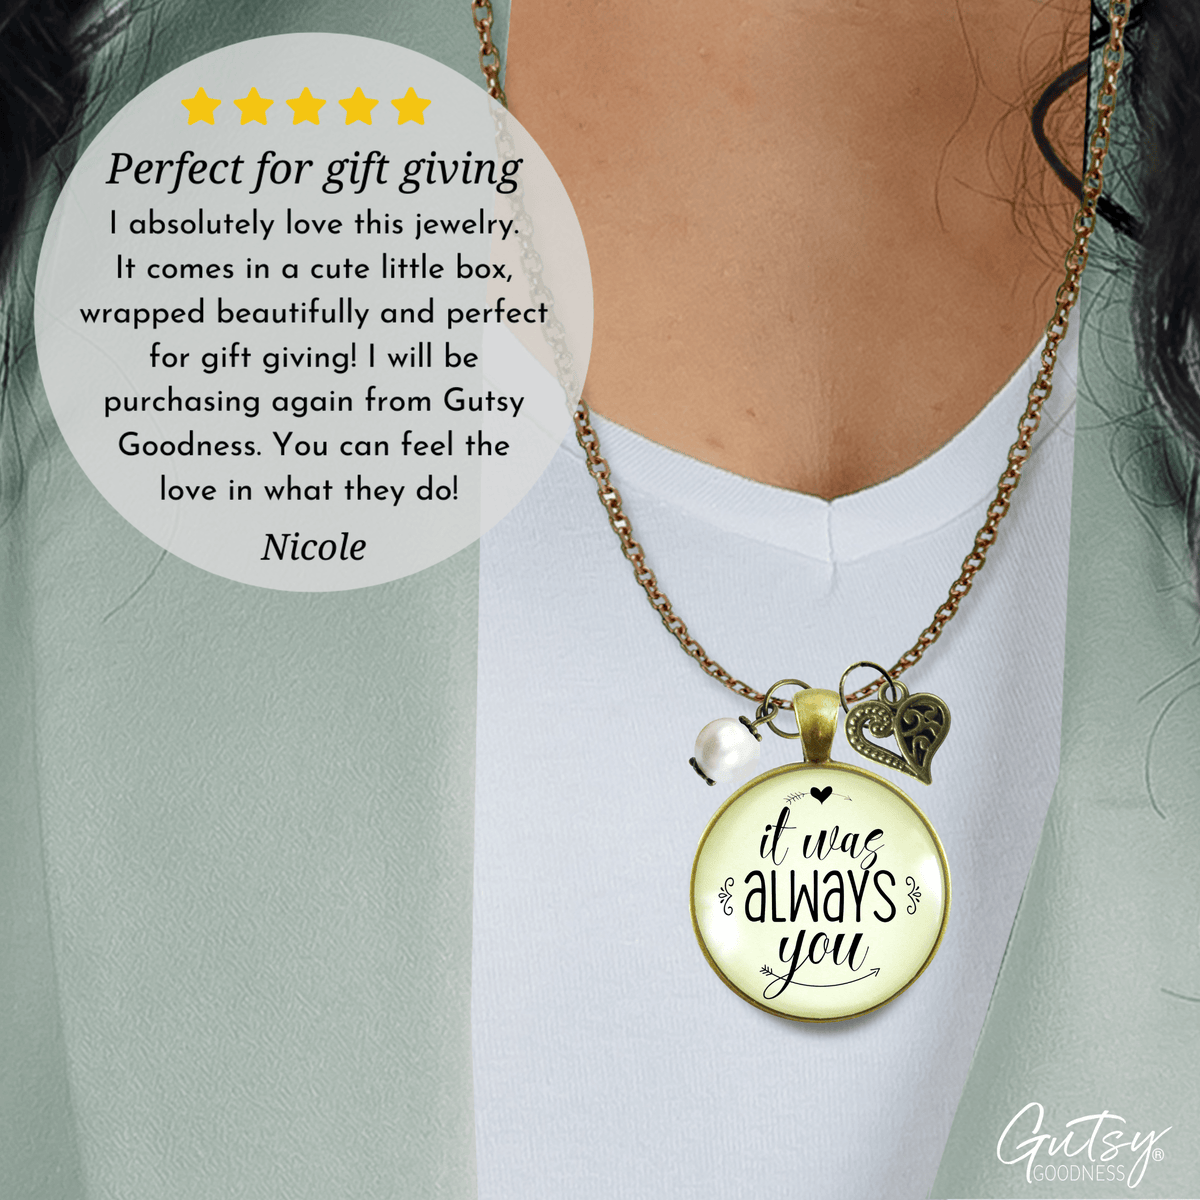 Gutsy Goodness It Was Always You Love Necklace Romantic Jewelry Heart Charm - Gutsy Goodness Handmade Jewelry;It Was Always You Love Necklace Romantic Jewelry Heart Charm - Gutsy Goodness Handmade Jewelry Gifts